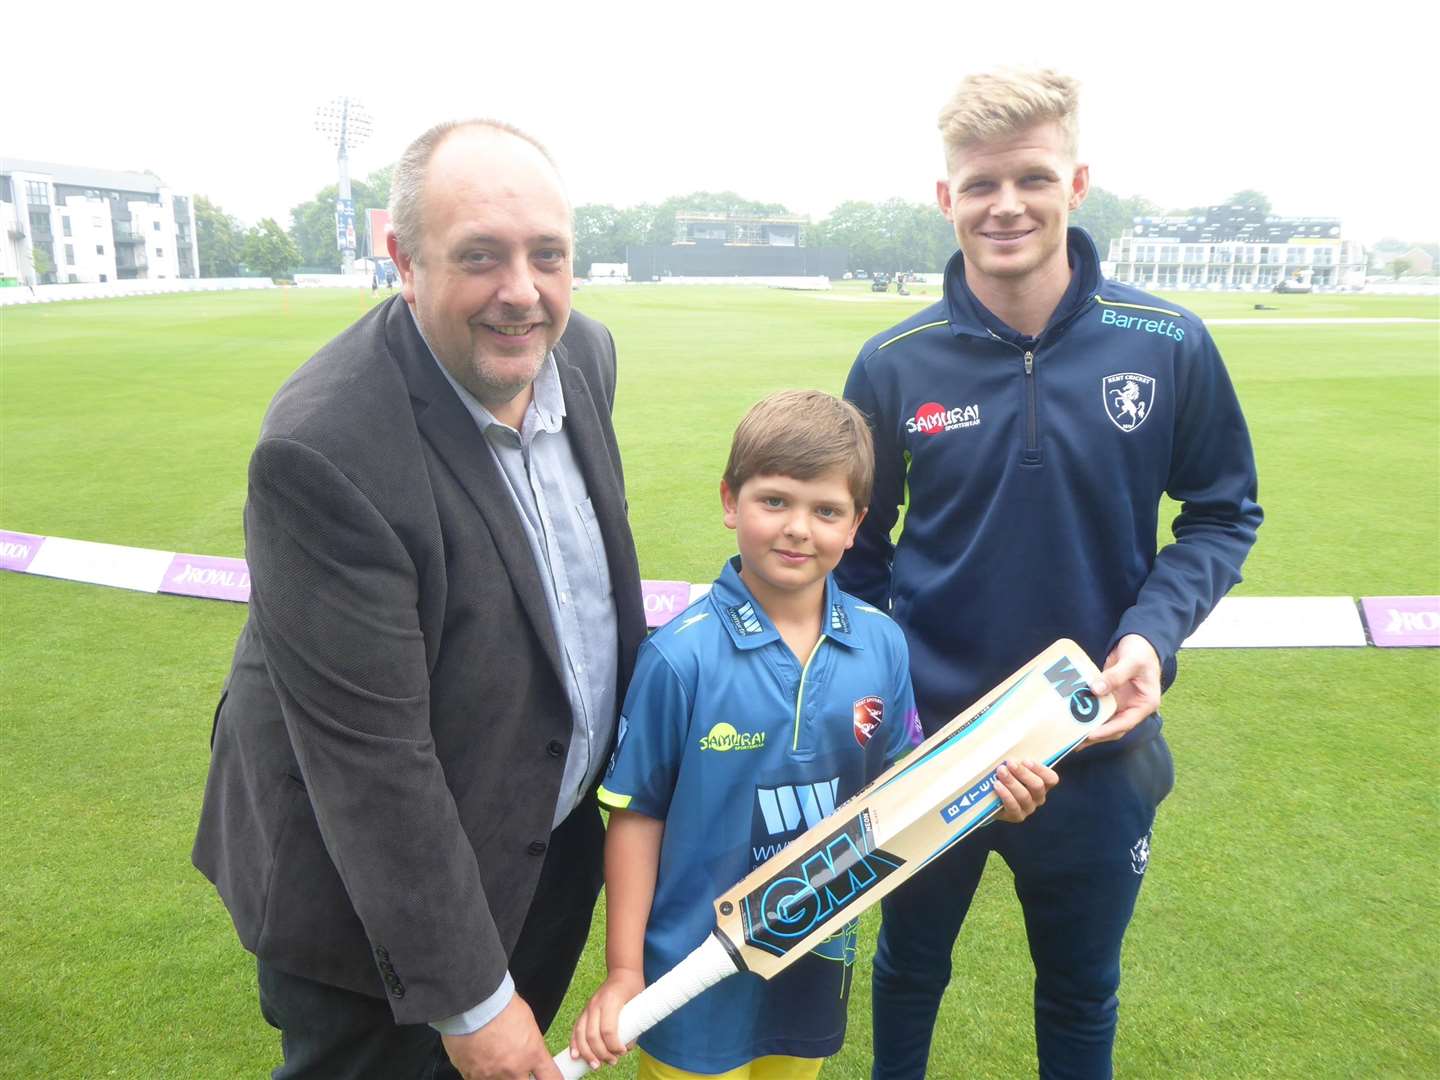 Neil Peck, left, of WW Martin and Captain Sam Billings with Oliver Glewis, 8, of Whitstable Junior School. (2355243)